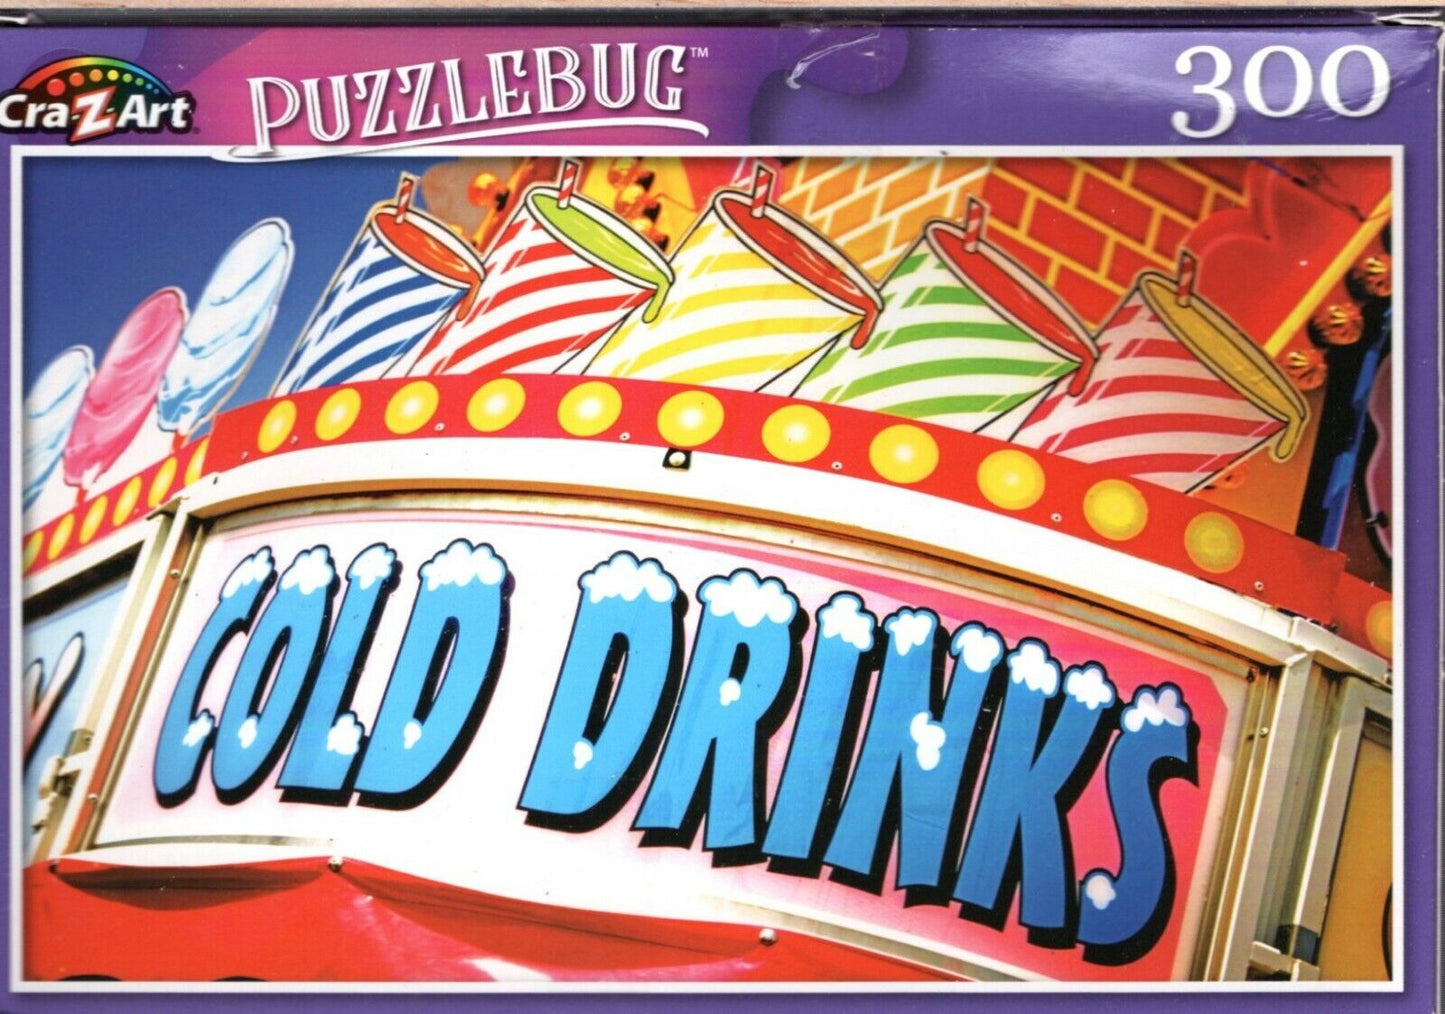 Cold Drinks Refreshment Sign - 300 Pieces Jigsaw Puzzle